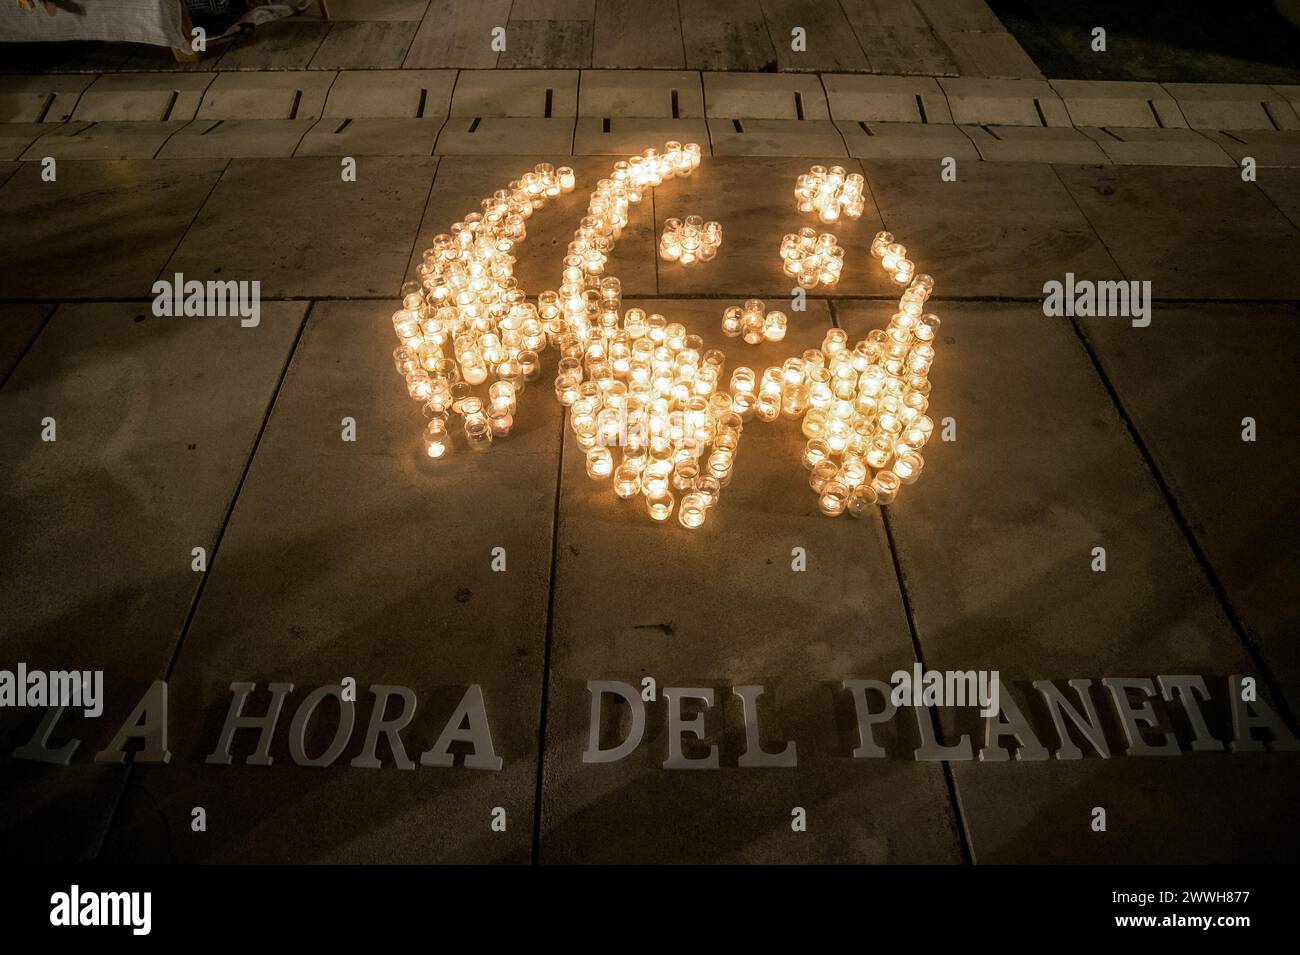 Malaga, Spain. 23rd Mar, 2024. A mosaic made with candles that depicts a panda, the symbol of WWF, is seen on the ground with slogan: 'La hora del planeta' (The hour of the earth) during the Earth Hour in the centre of Malaga. The figure made with candles is a panda, the symbol of the WWF. Thousands of cities worldwide switched off their electric lights during Earth Hour to highlight the dangers of climate change. (Photo by Jesus Merida/SOPA Images/Sipa USA) Credit: Sipa USA/Alamy Live News Stock Photo